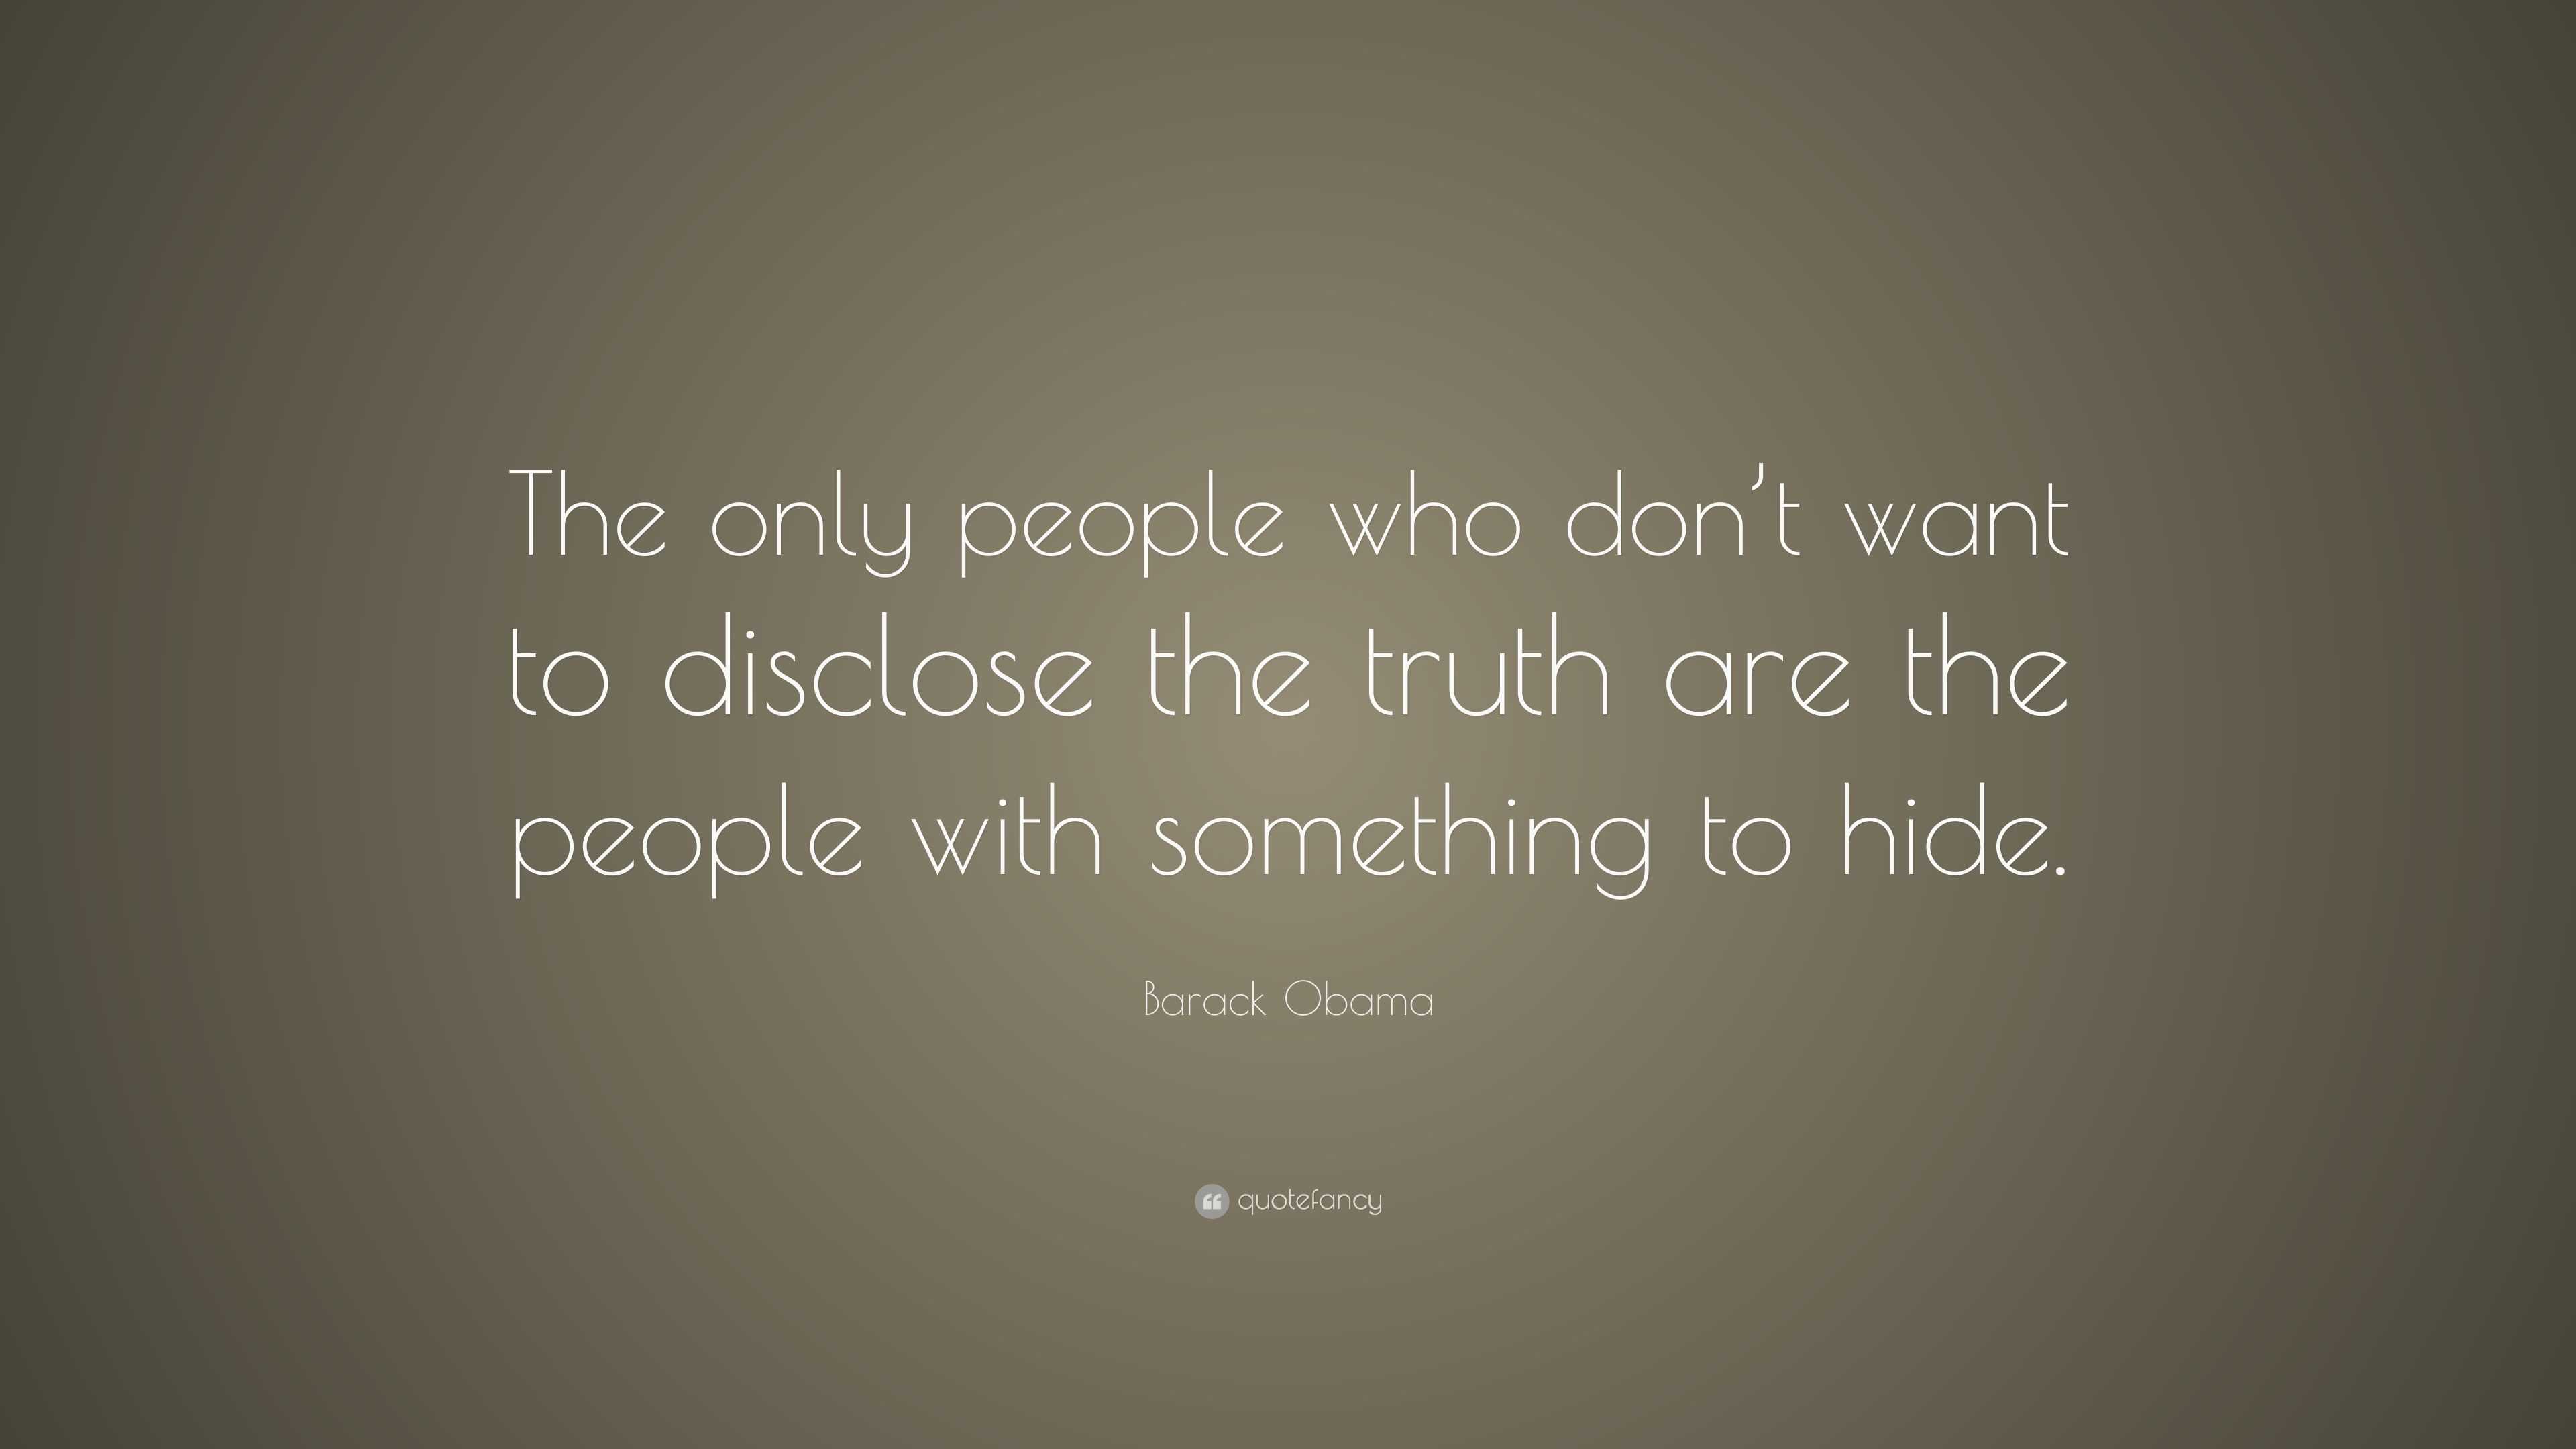 Barack Obama Quote: “The only people who don’t want to disclose the ...